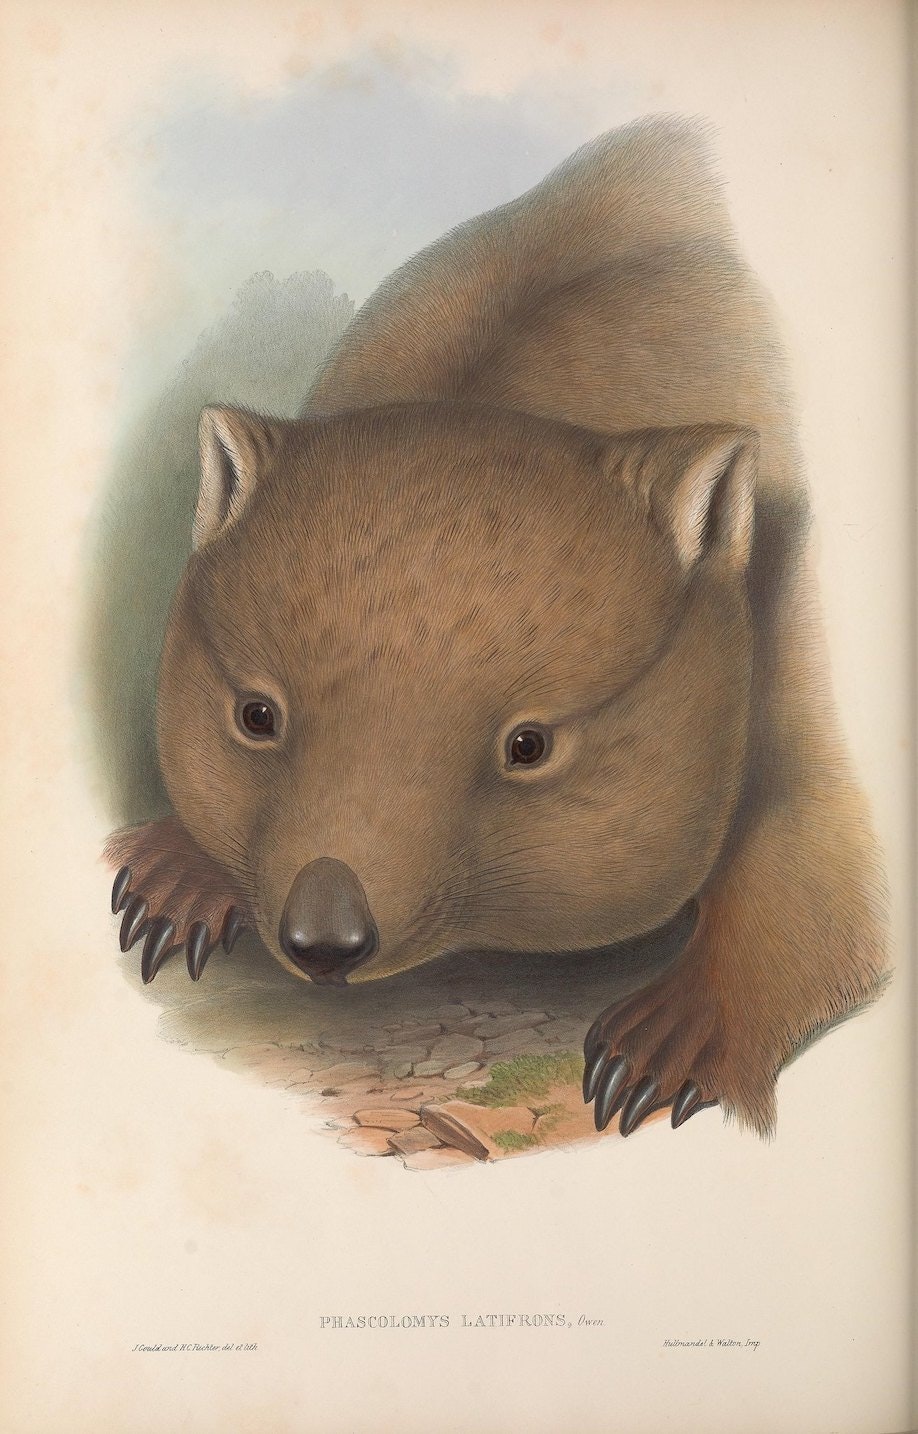 A Southern Hairy-Nosed Wombat